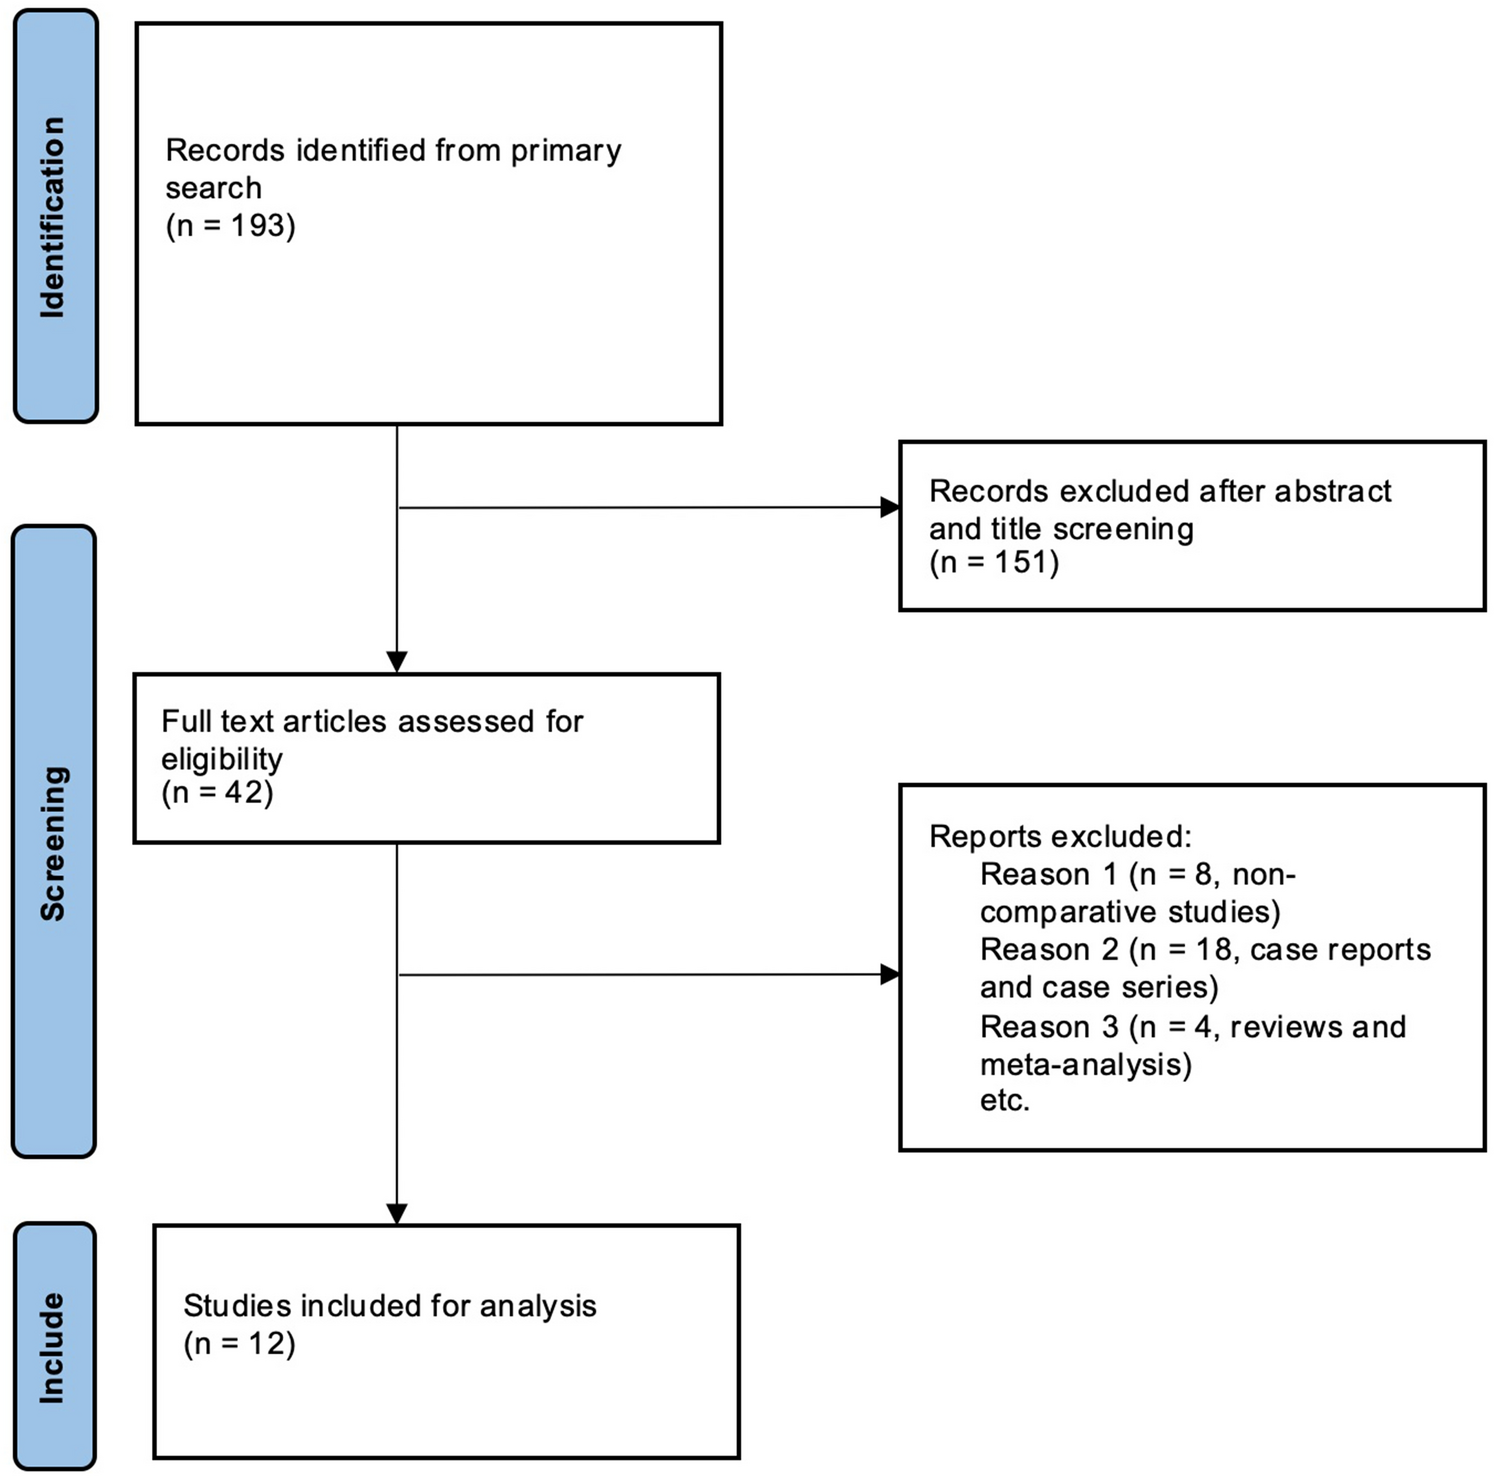 Laparoscopic repair of duodenal atresia: systematic review and meta-analysis after consistent implementation of the technique in the past decade